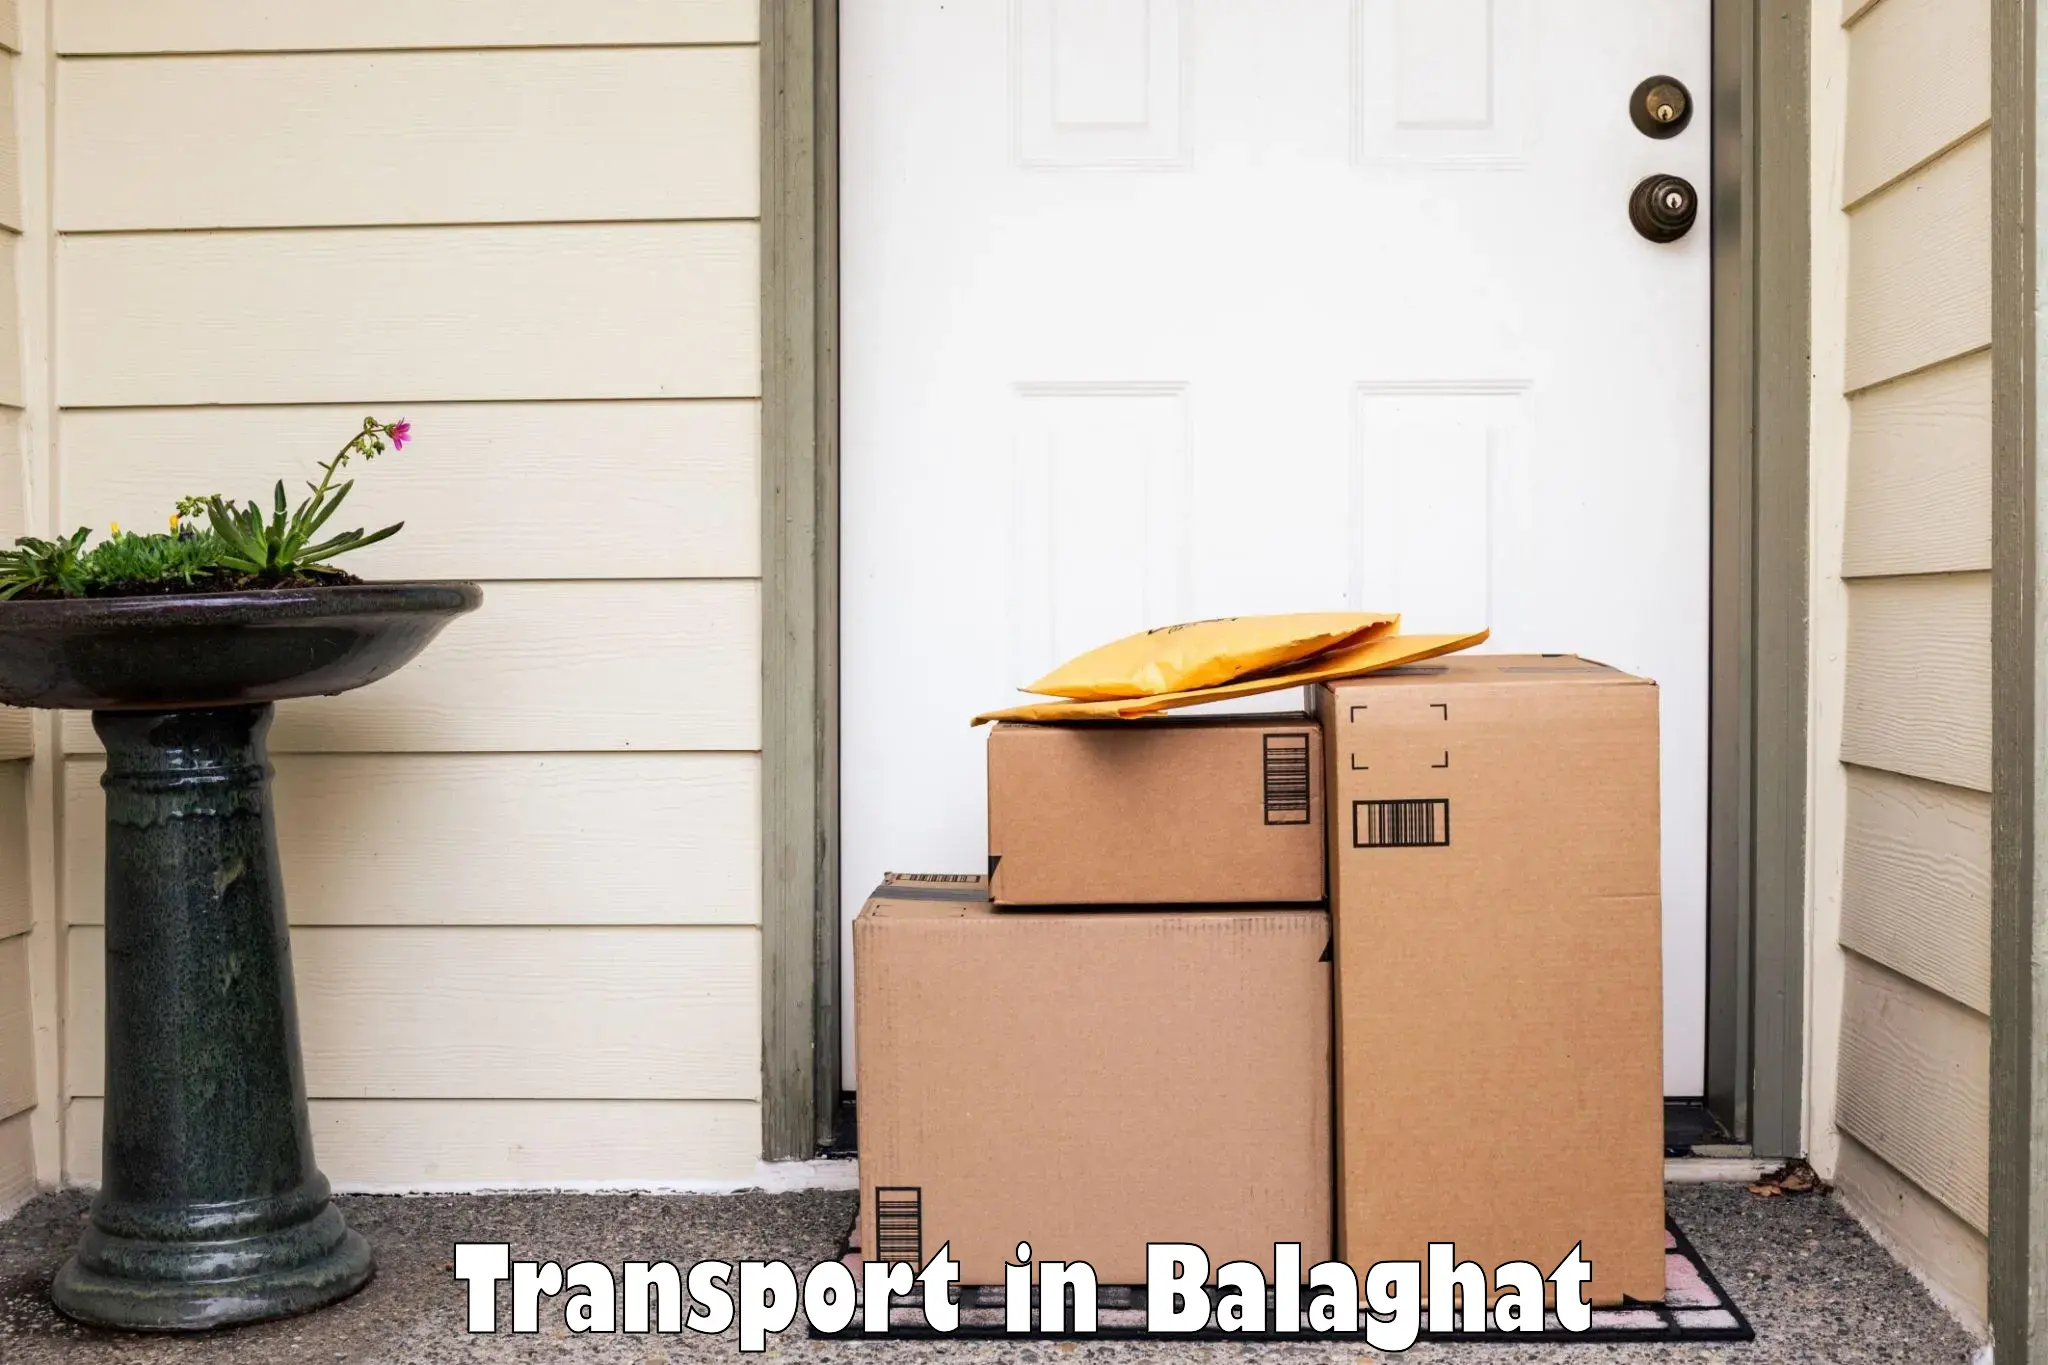 Air freight transport services in Balaghat